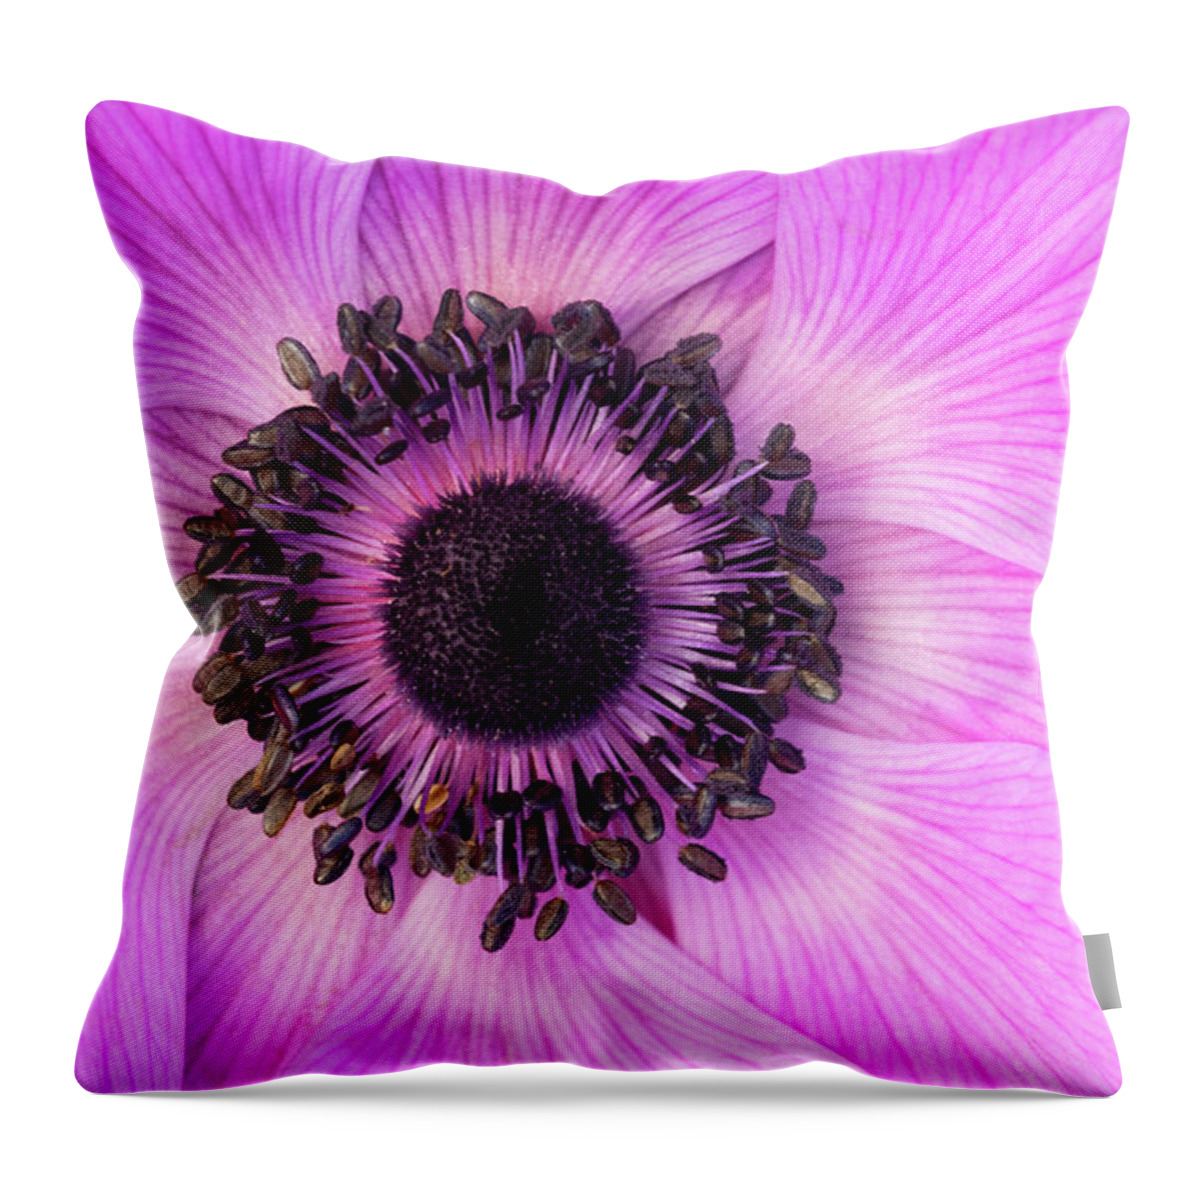 Flowers Throw Pillow featuring the photograph Poppy Anemone by Patty Colabuono